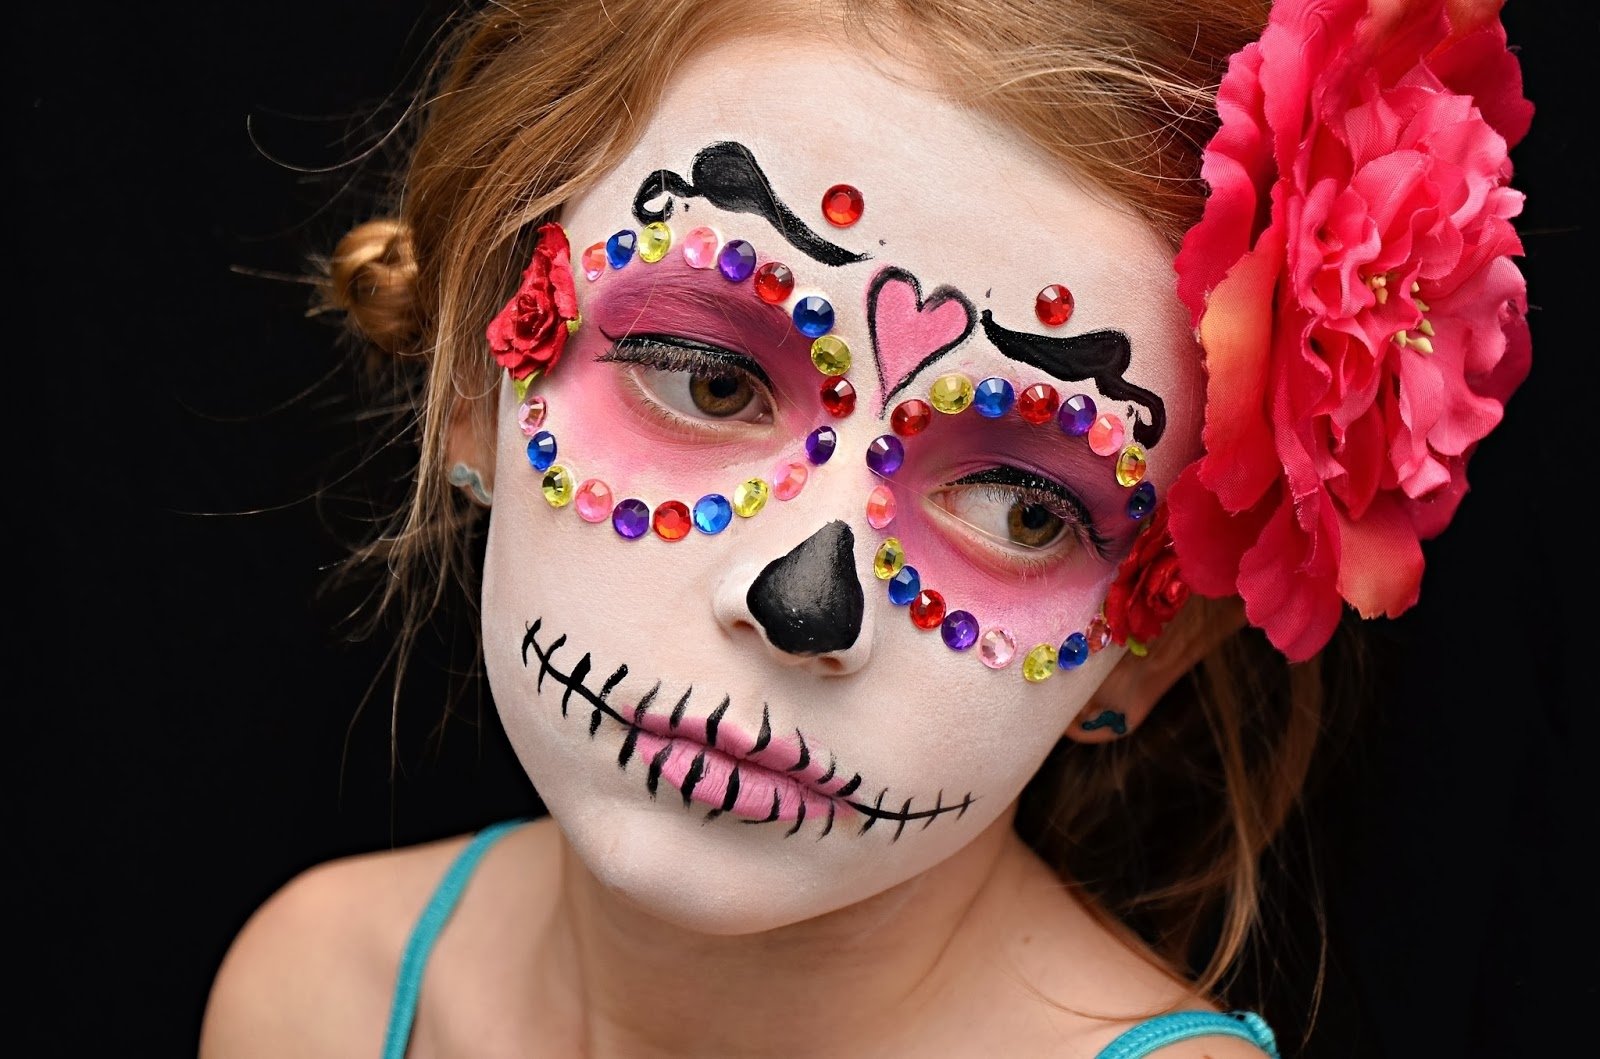 10 Lovable Day Of The Dead Makeup Ideas a fun dia de los muertos make over photo shoot party and the kids 2023